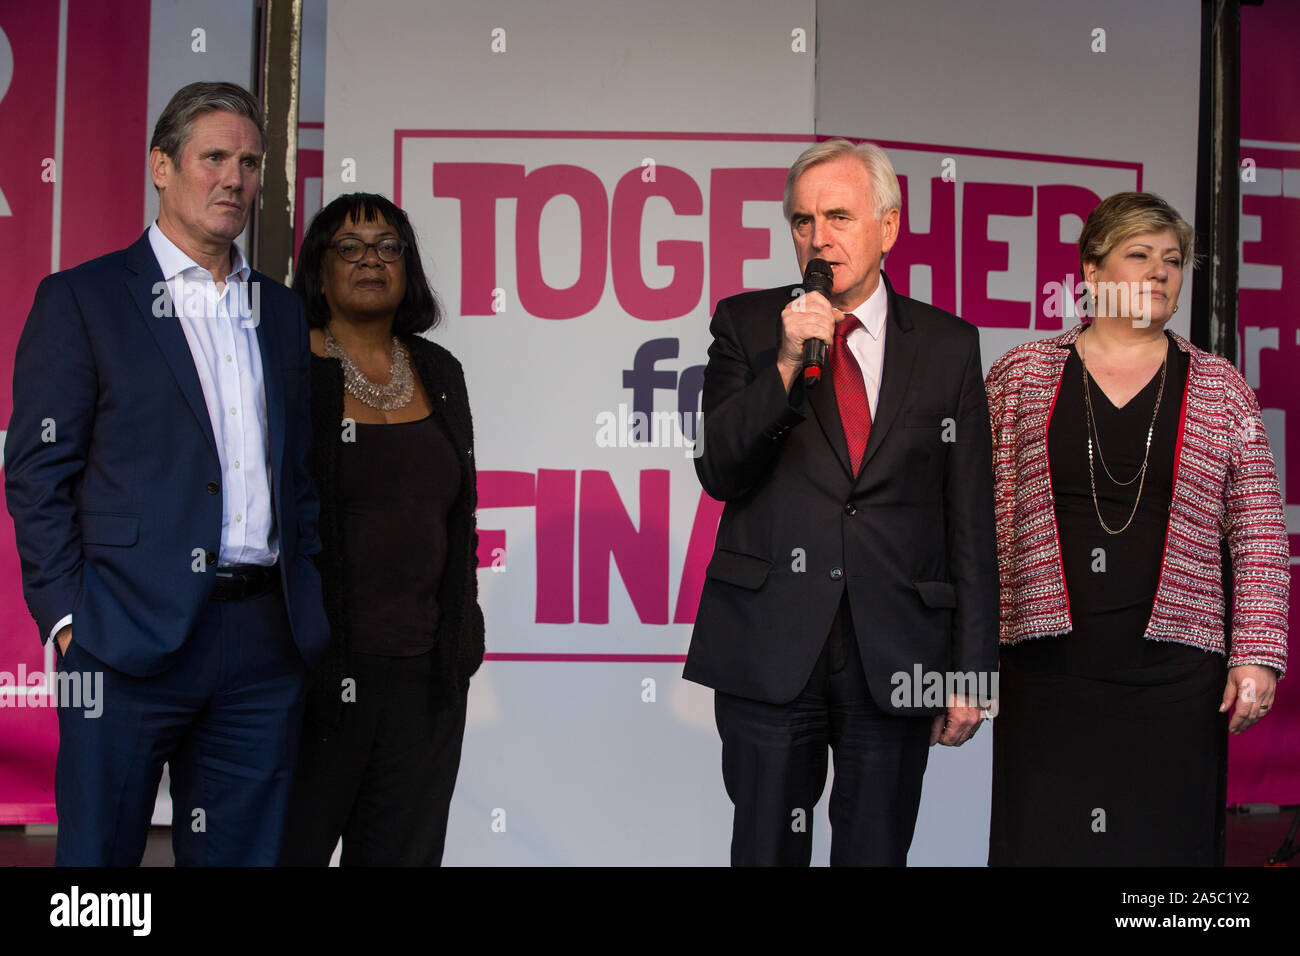 London, UK. 19 October, 2019. John McDonnell, Shadow Chancellor, seen here with Shadow Brexit Secretary Sir Keir Starmer, Shadow Home Secretary Diane Abbott and Shadow Foreign Secretary Emily Thornberry, addresses hundreds of thousands of pro-EU citizens at a Together for the Final Say People’s Vote rally in Parliament Square as MPs meet in a ‘super Saturday’ Commons session, the first such sitting since the Falklands conflict, to vote, subject to the Sir Oliver Letwin amendment, on the Brexit deal negotiated by Prime Minister Boris Johnson with the European Union. Credit: Mark Kerrison/Alamy Stock Photo